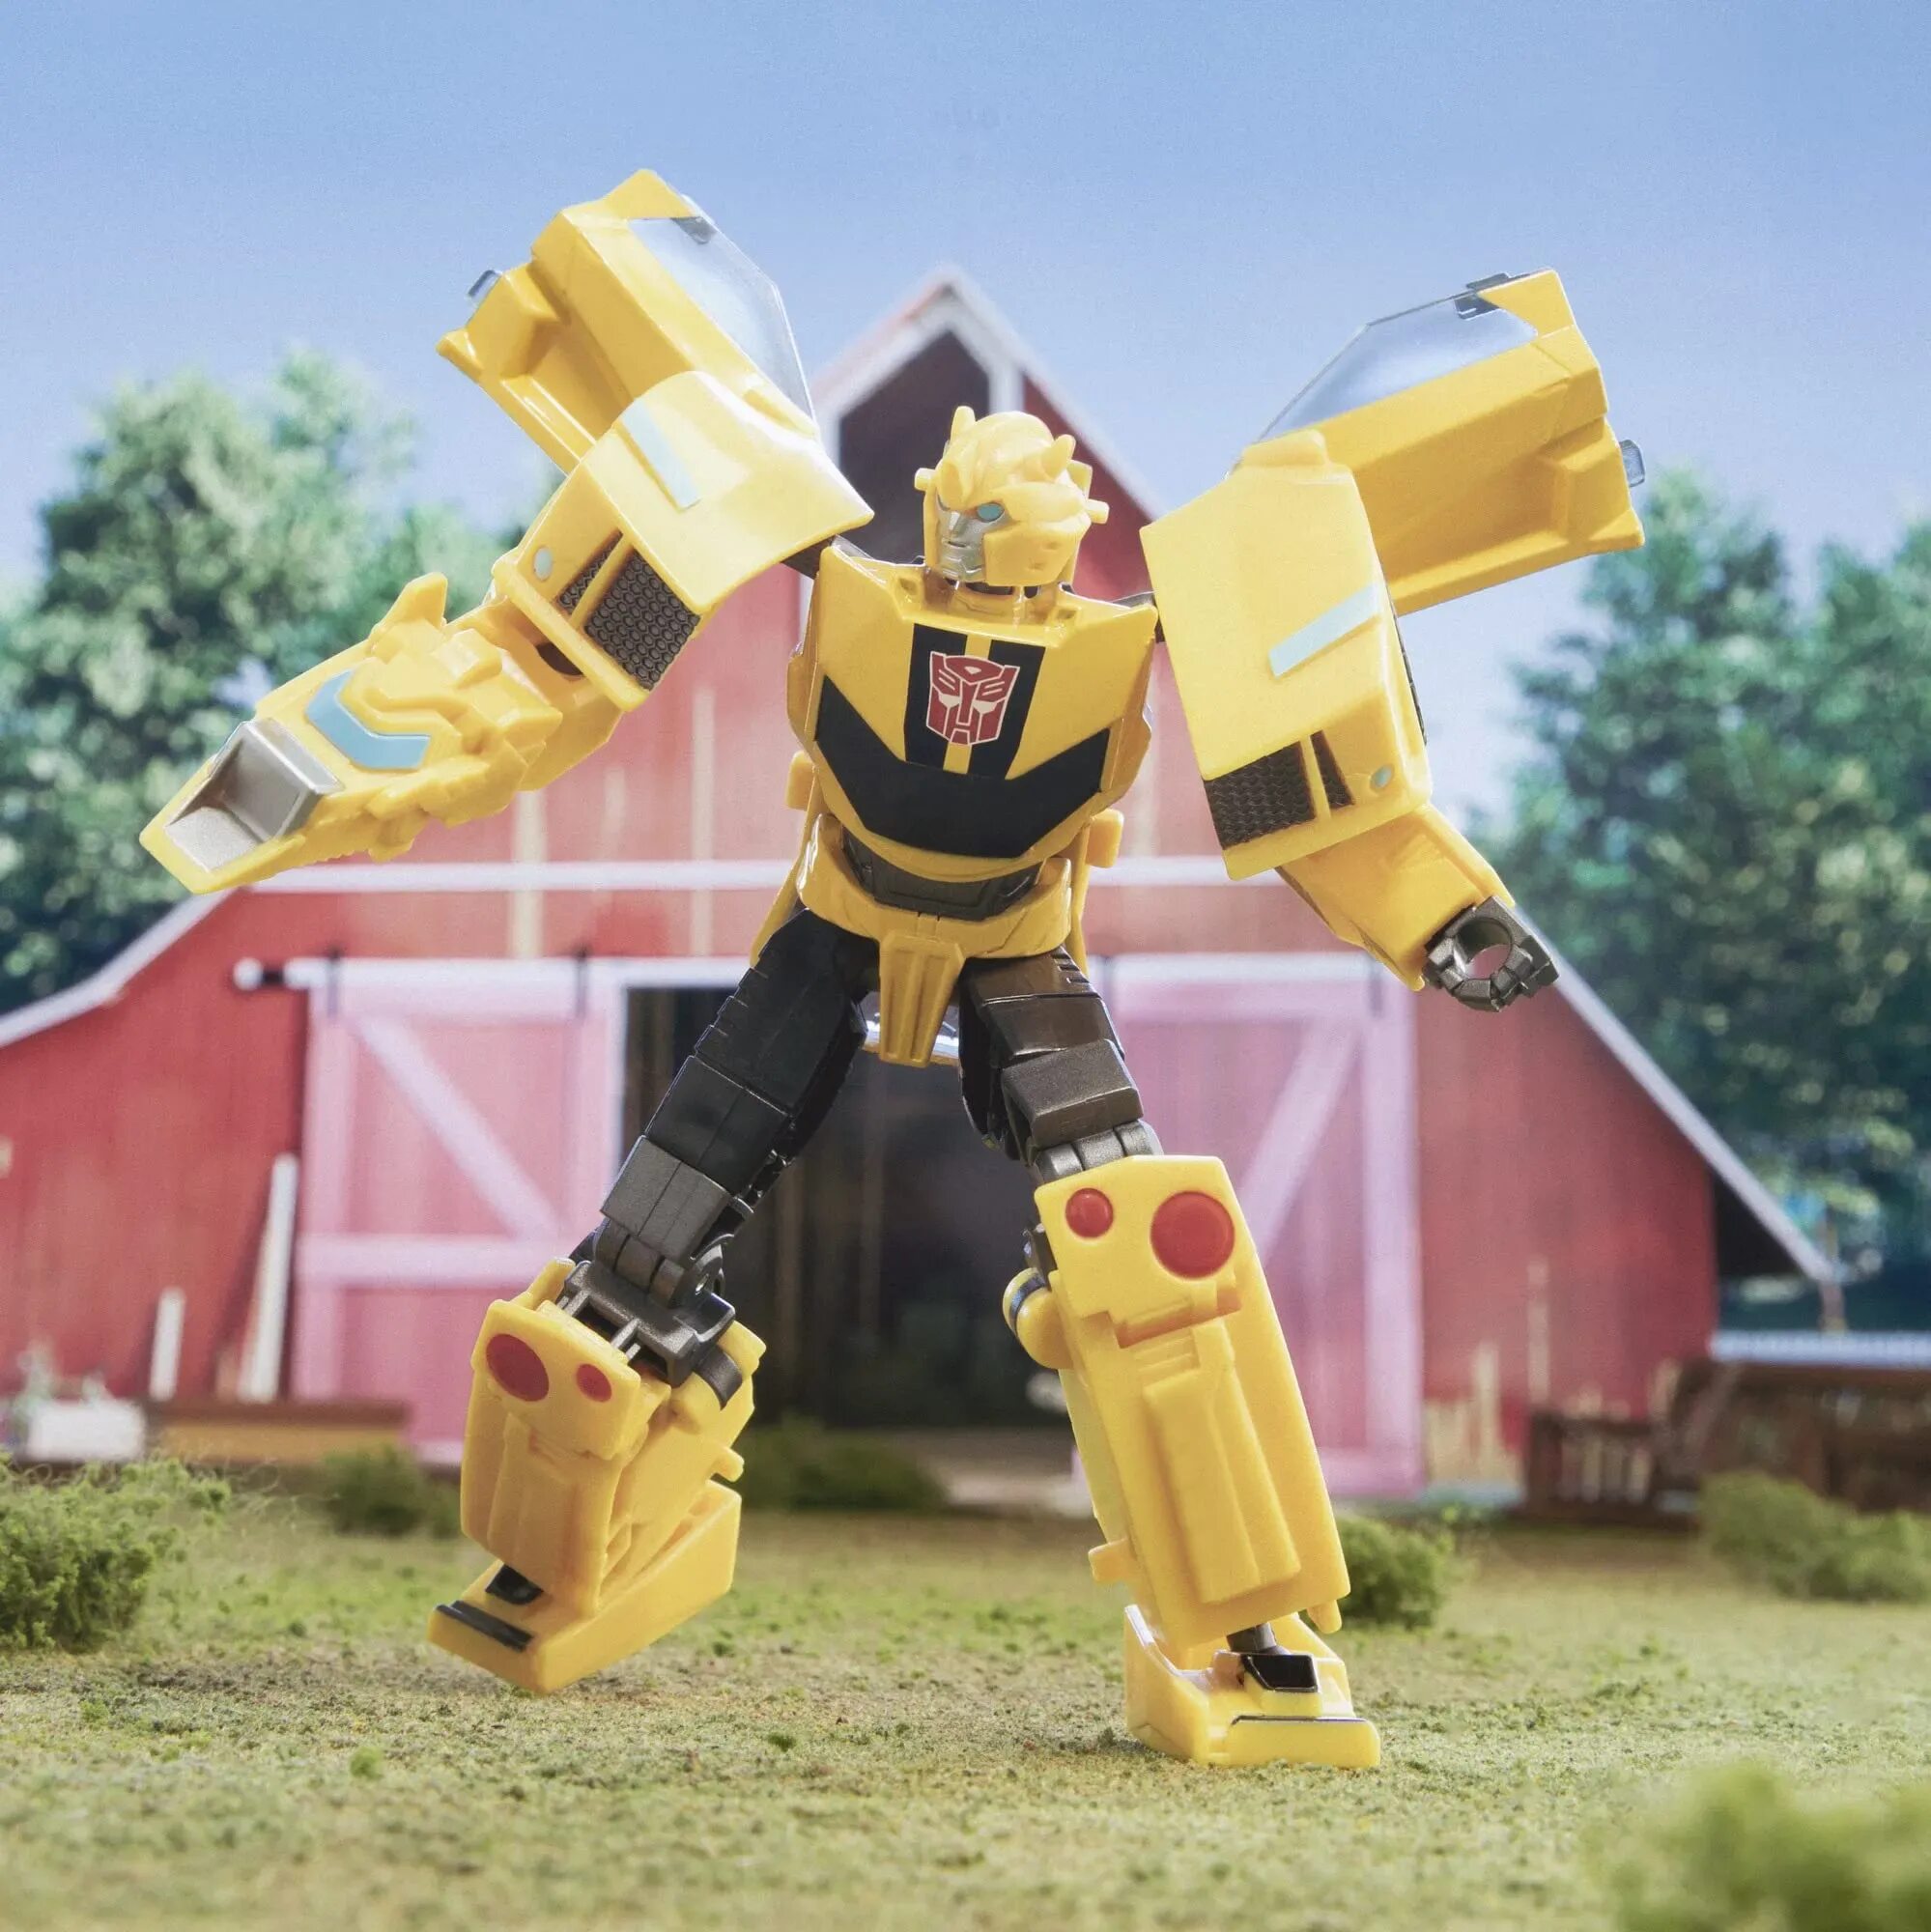 Transformers Earth Spark Bumblebee. Transformers EARTHSPARK Deluxe class Бамблби. Transformers Earth Spark 2022. Transformers Earth Spark Bumblebee Figure.